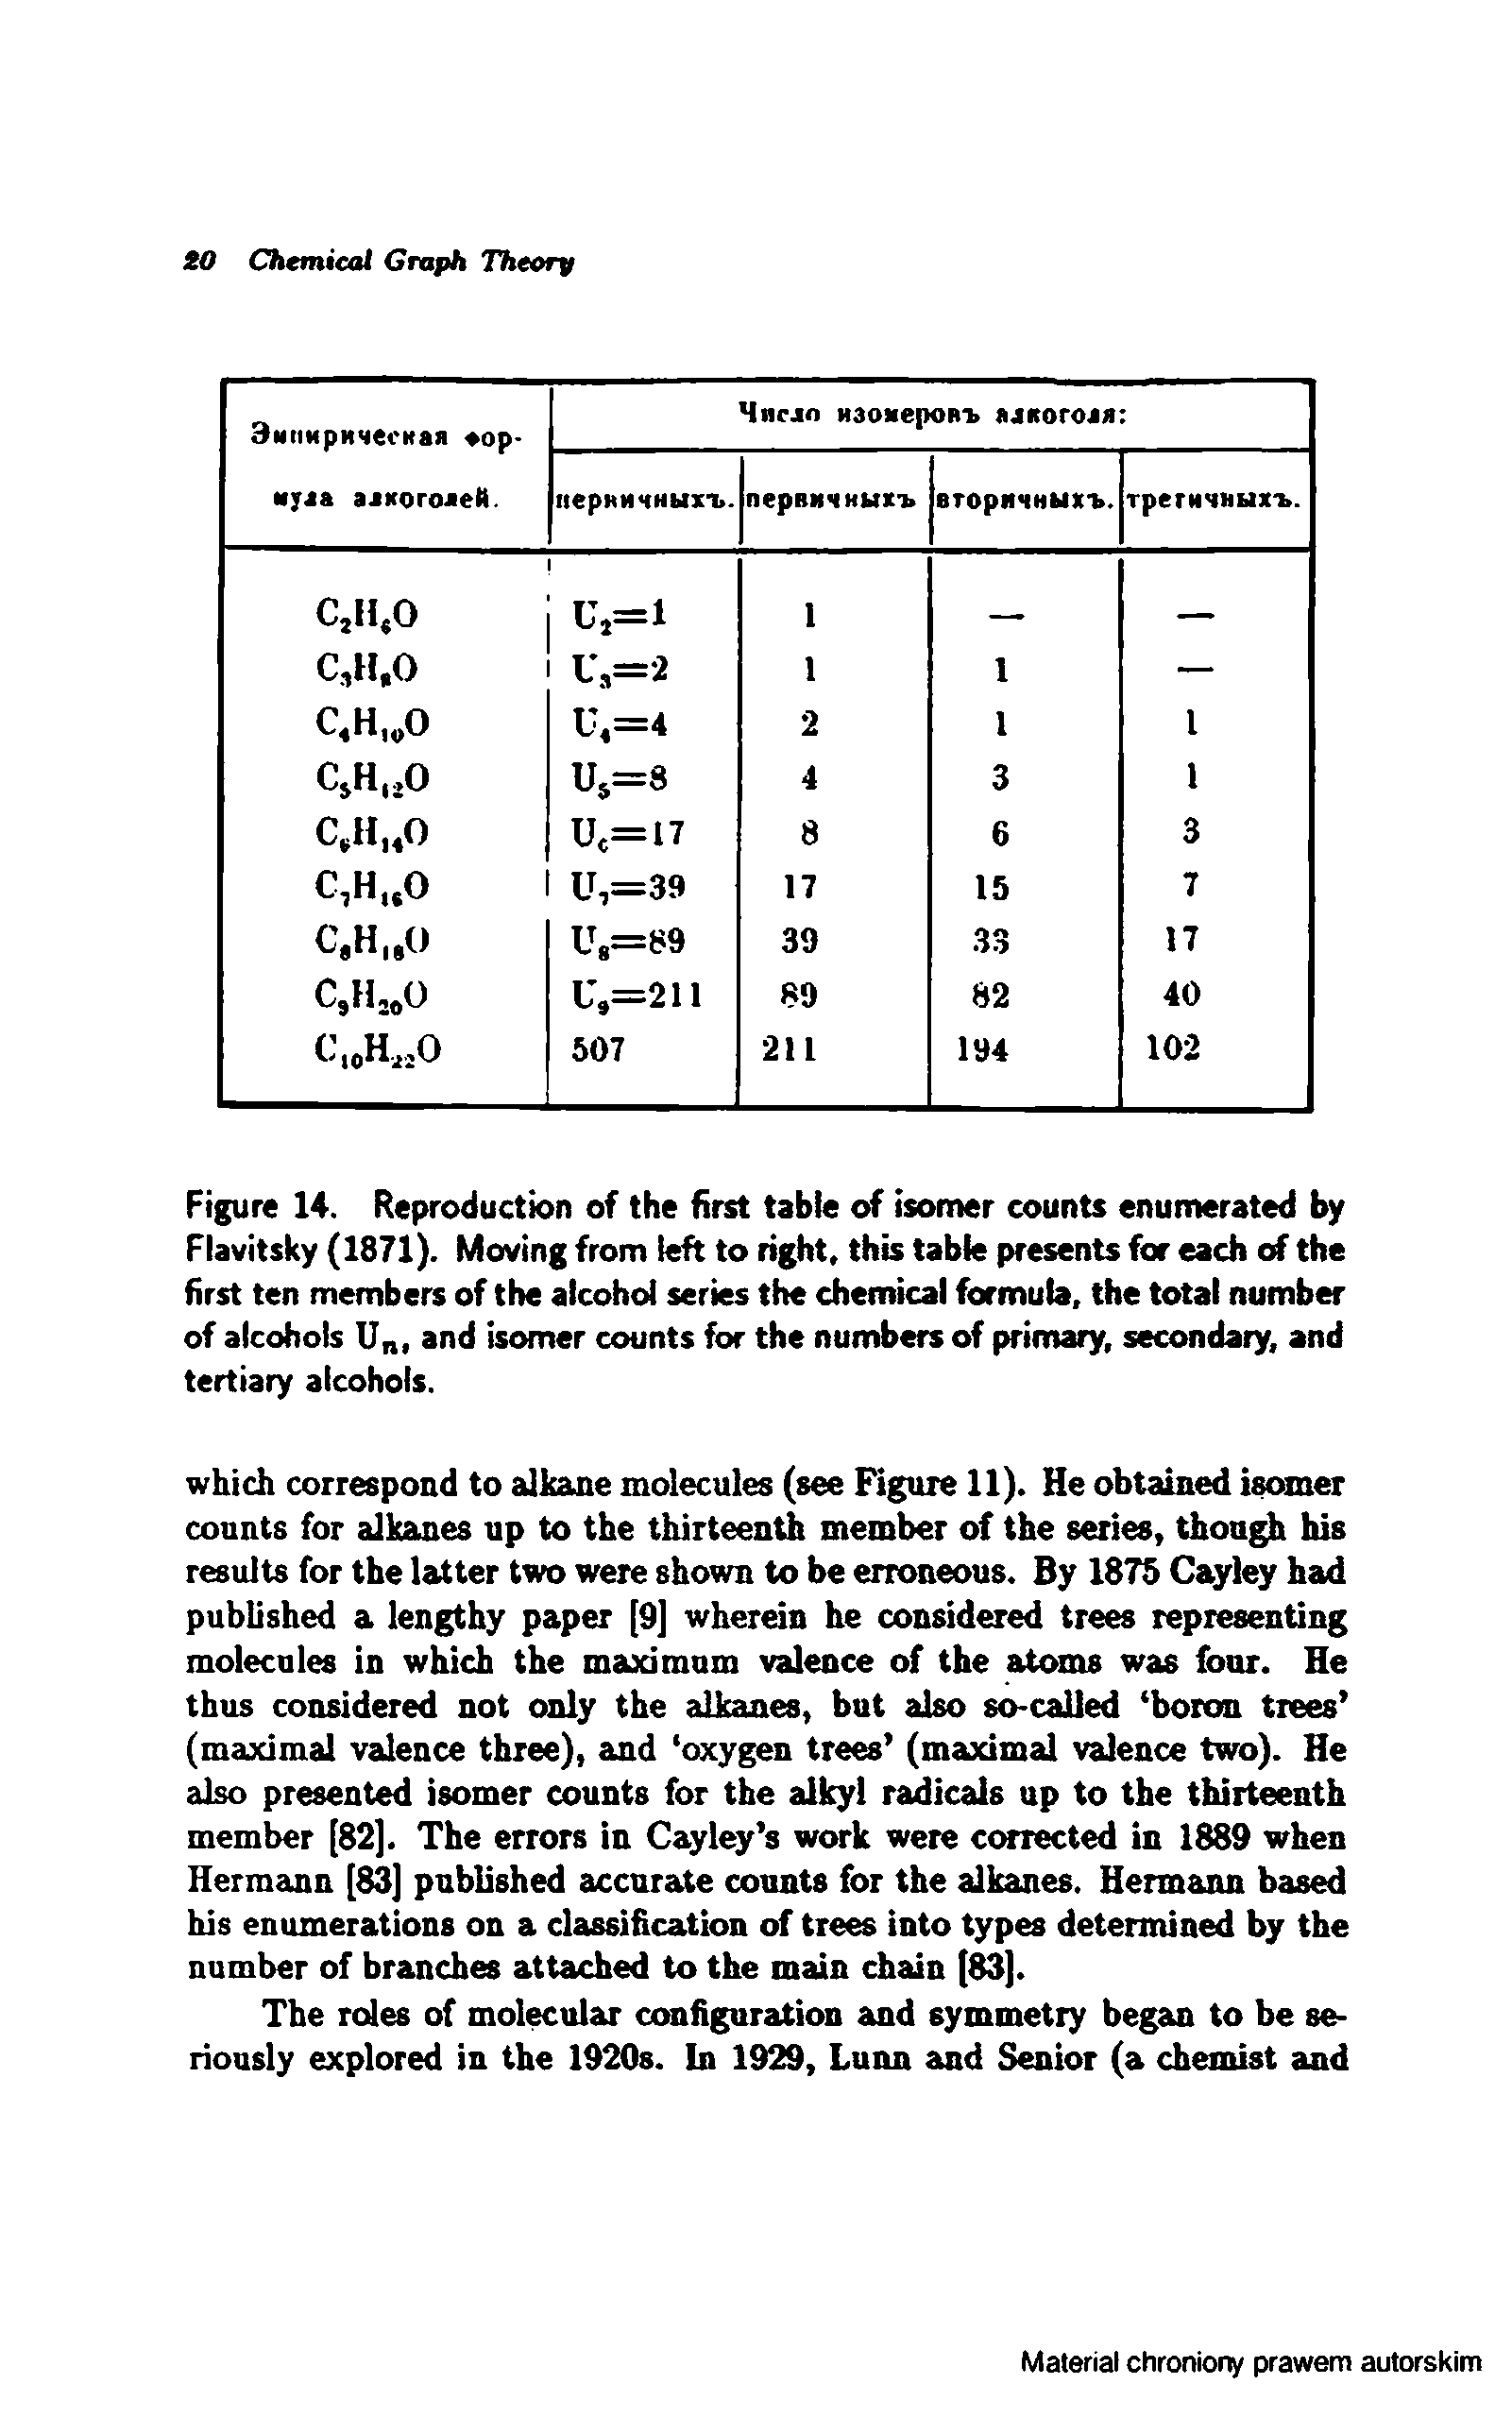 Figure 14. Reproduction of the first table of isomer counts enumerated by Flavitsky (1871). Moving from left to right this table presents for each of the first ten members of the alcohol series the chemical formula the total number of alcohols Um and isomer counts for the numbers of primary secondary, and tertiary alcohols.